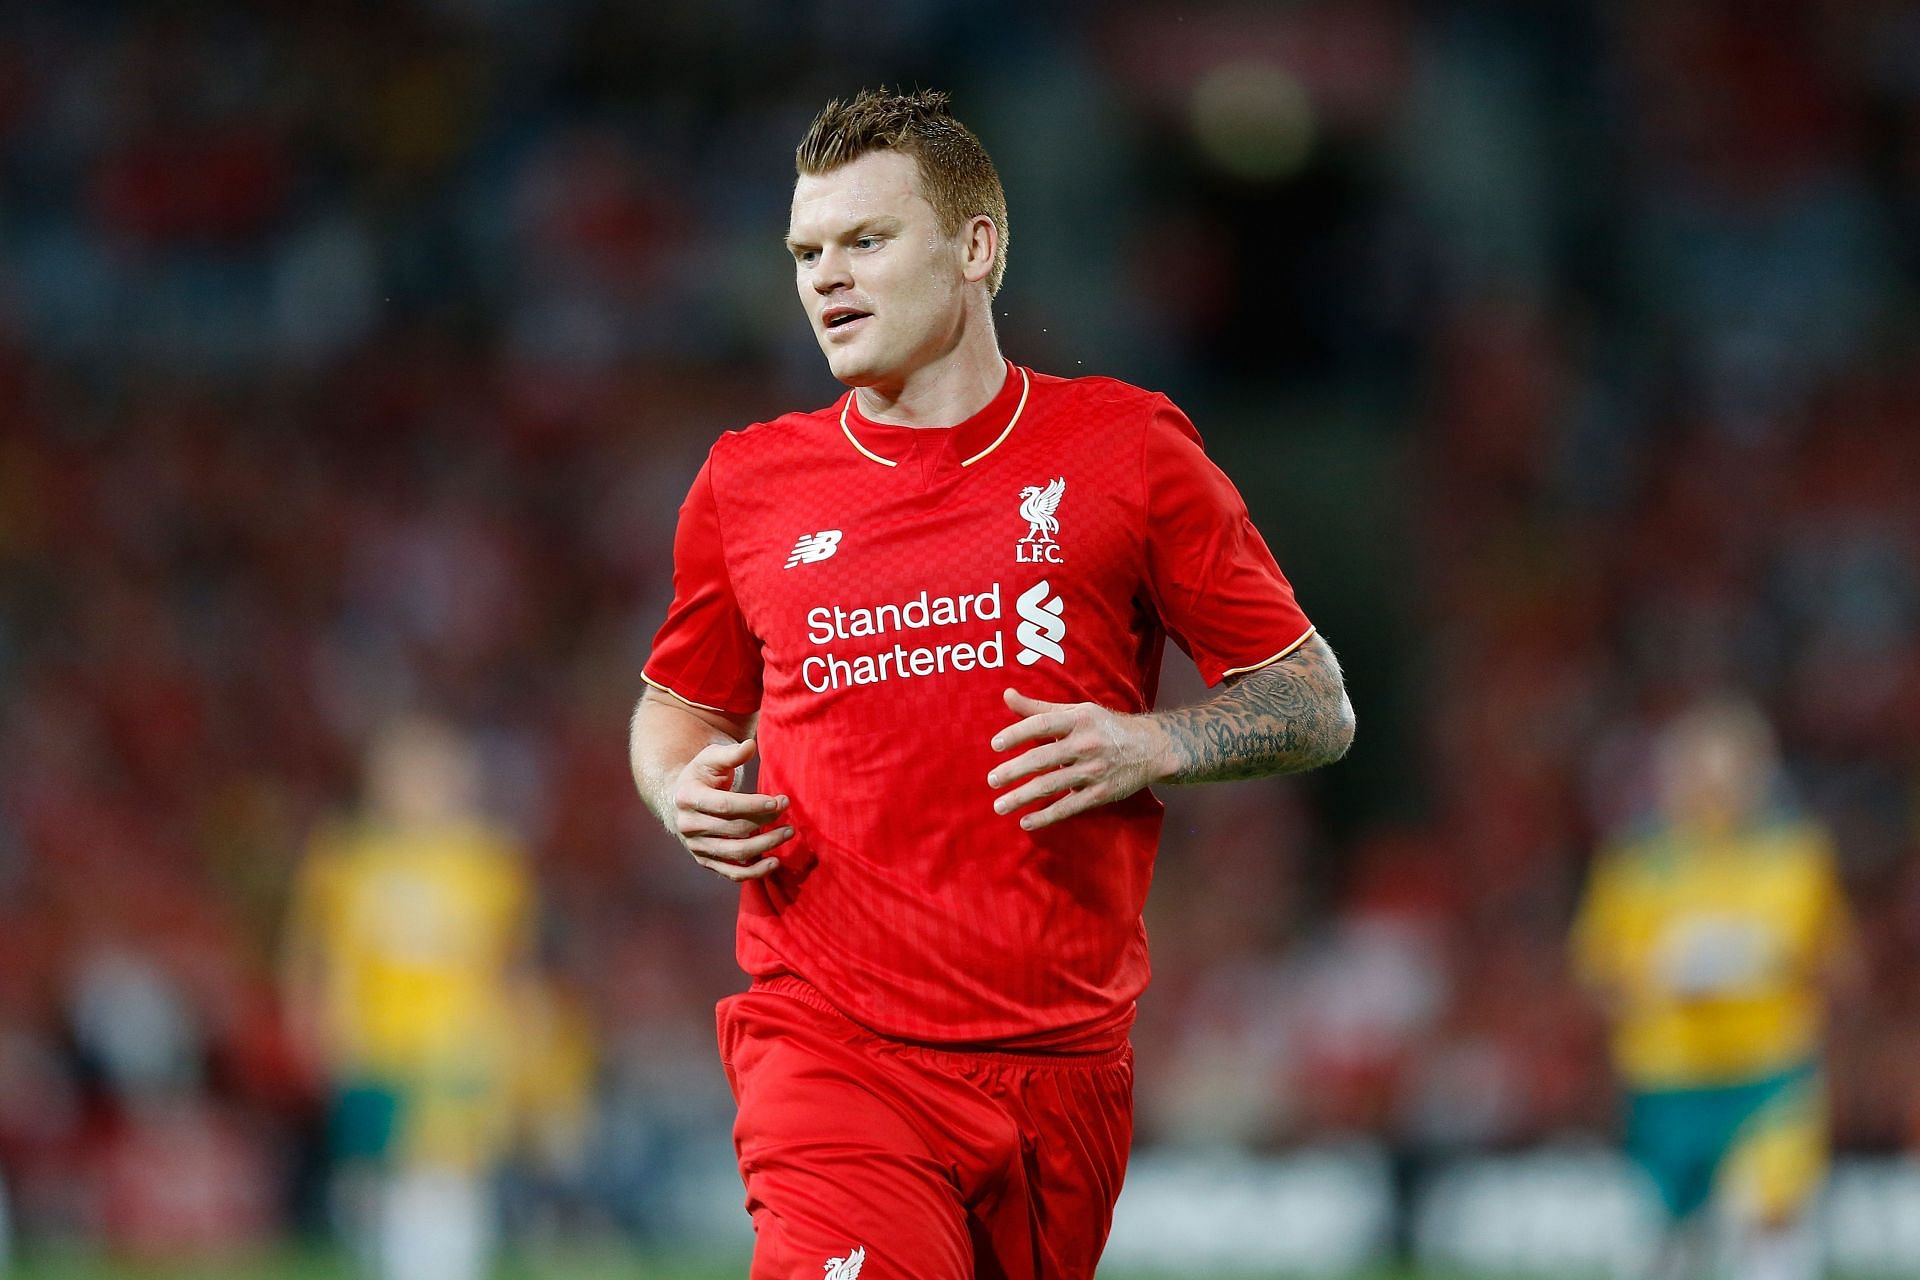 Riise is a Liverpool icon